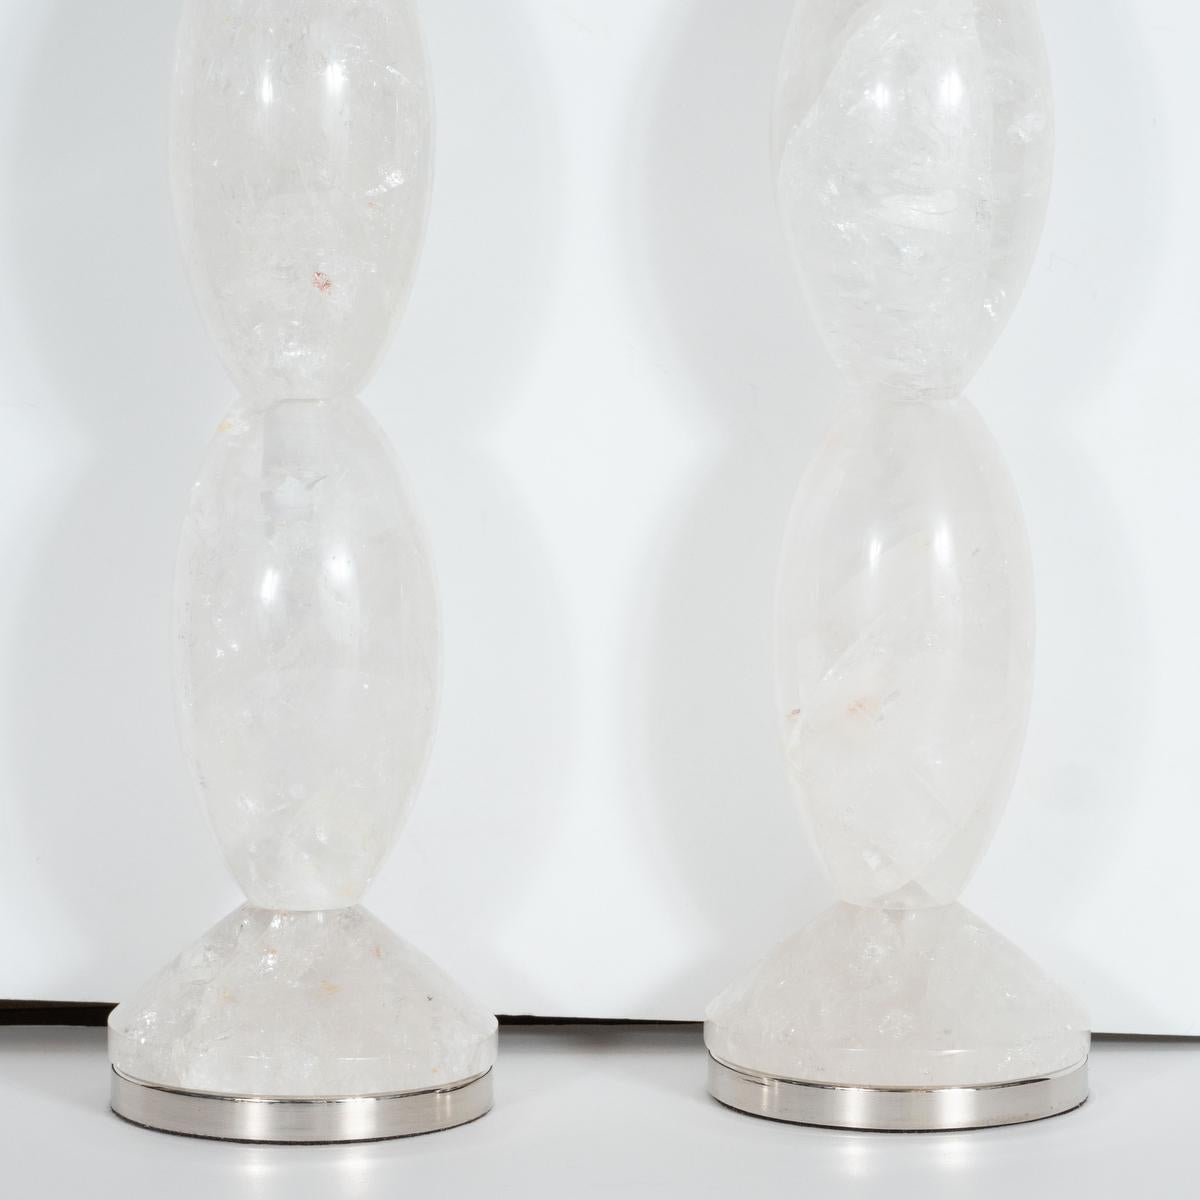 Pair of Hand-Cut and Polished Stacked Rock Crystal Table Lamps by Spark Interior For Sale 2